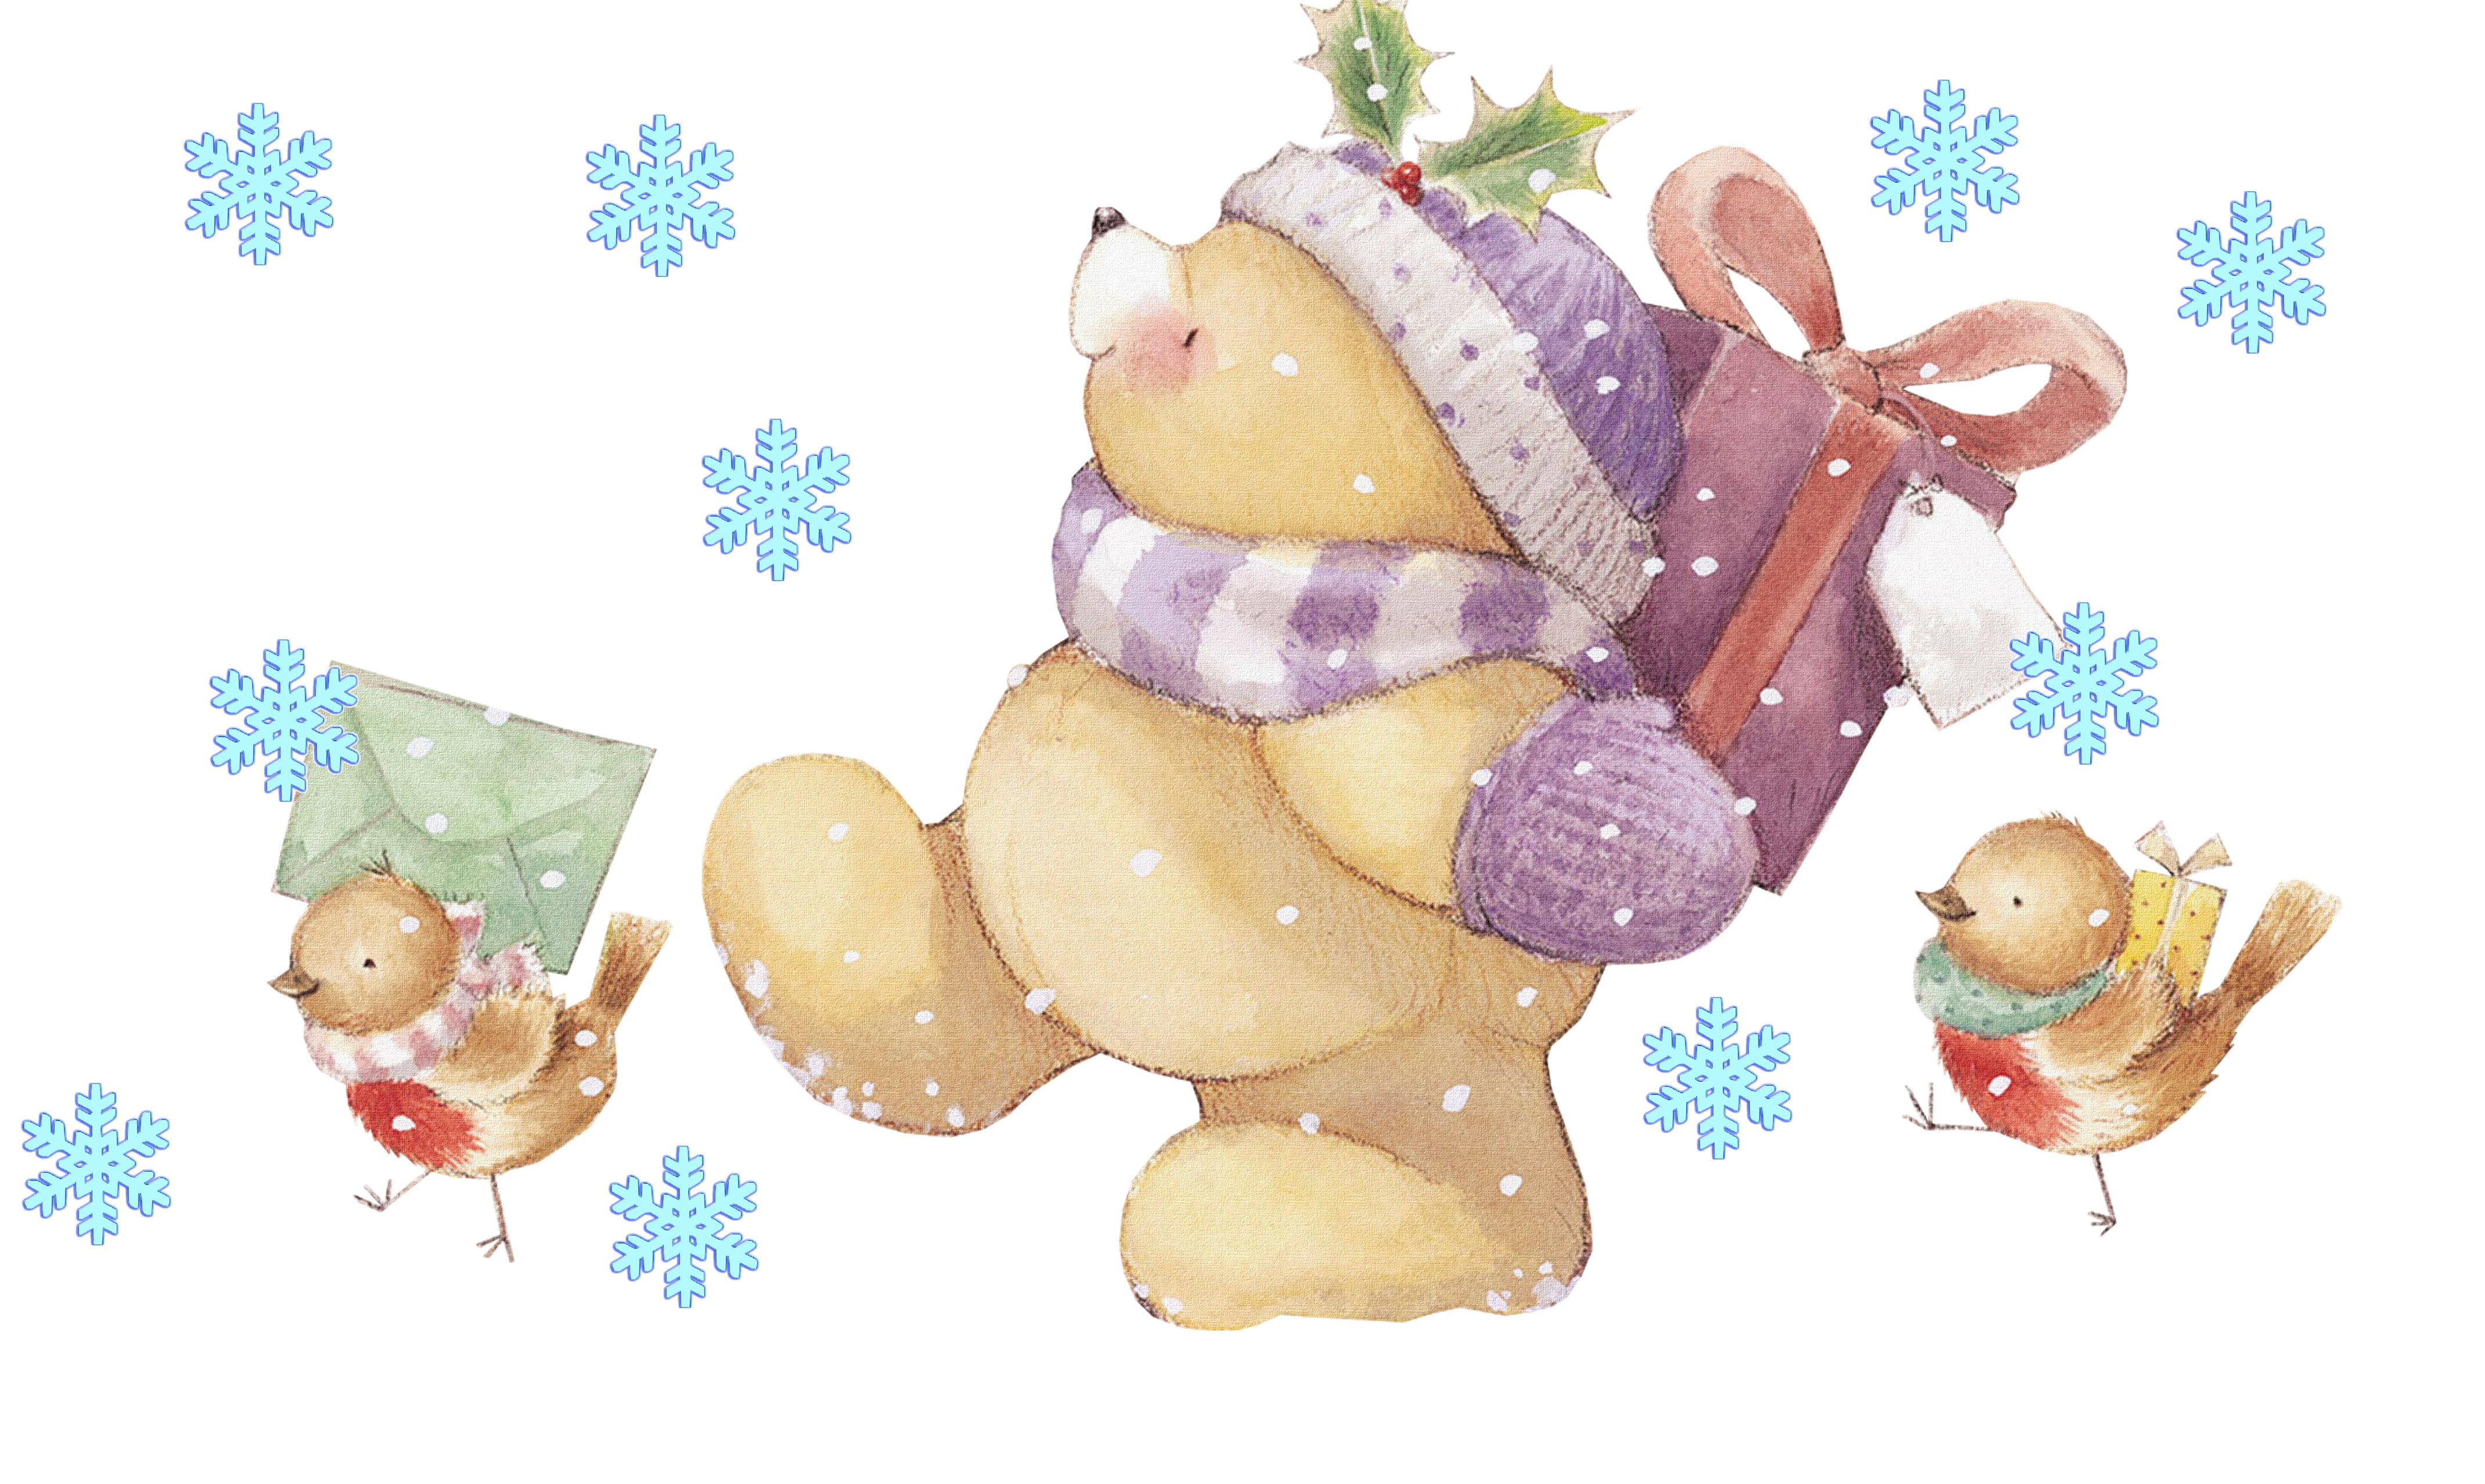 winter, letter, snowflakes, mood, holiday, gift, art, bear